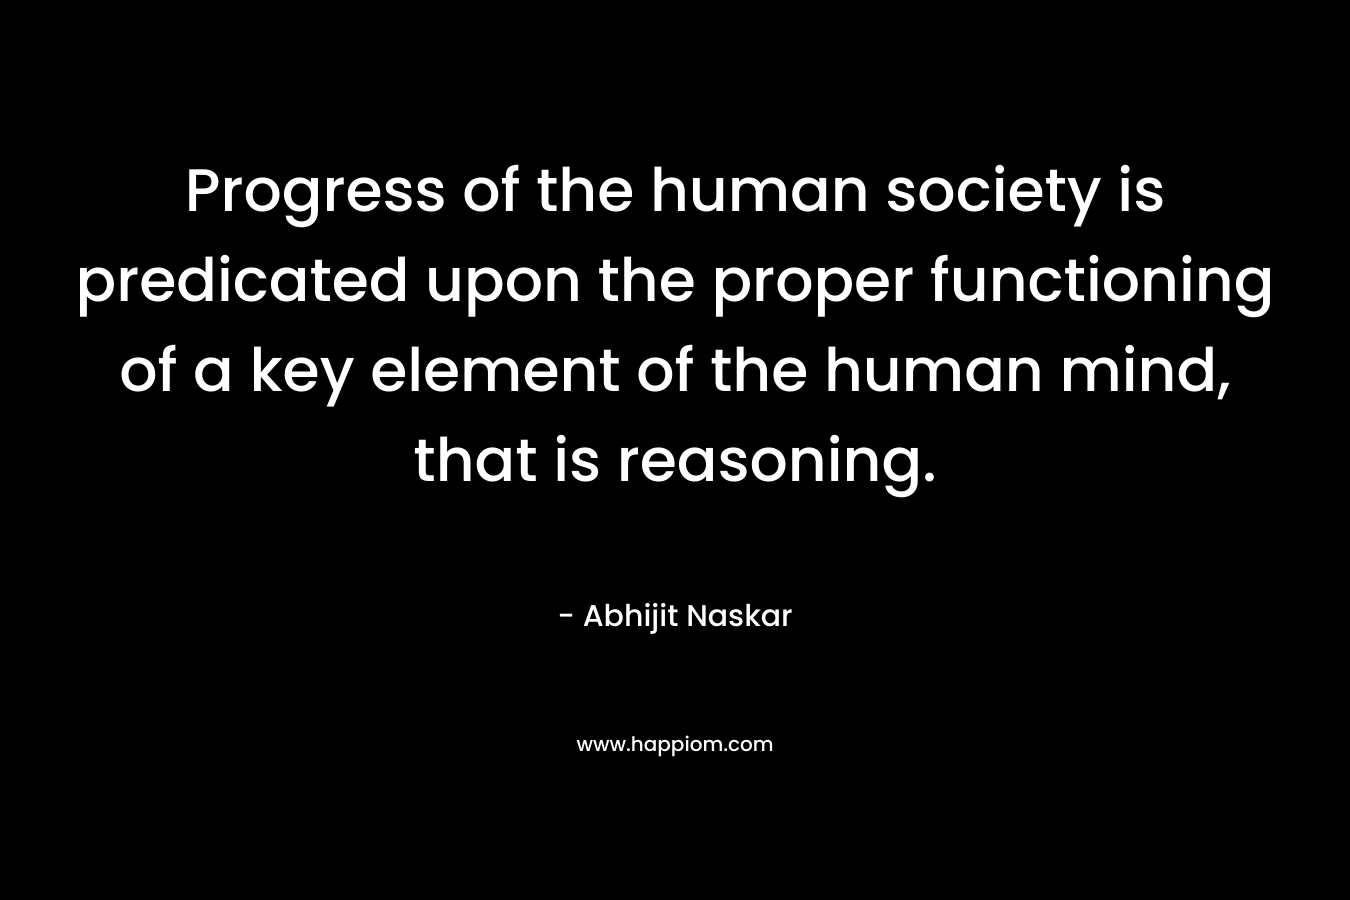 Progress of the human society is predicated upon the proper functioning of a key element of the human mind, that is reasoning.